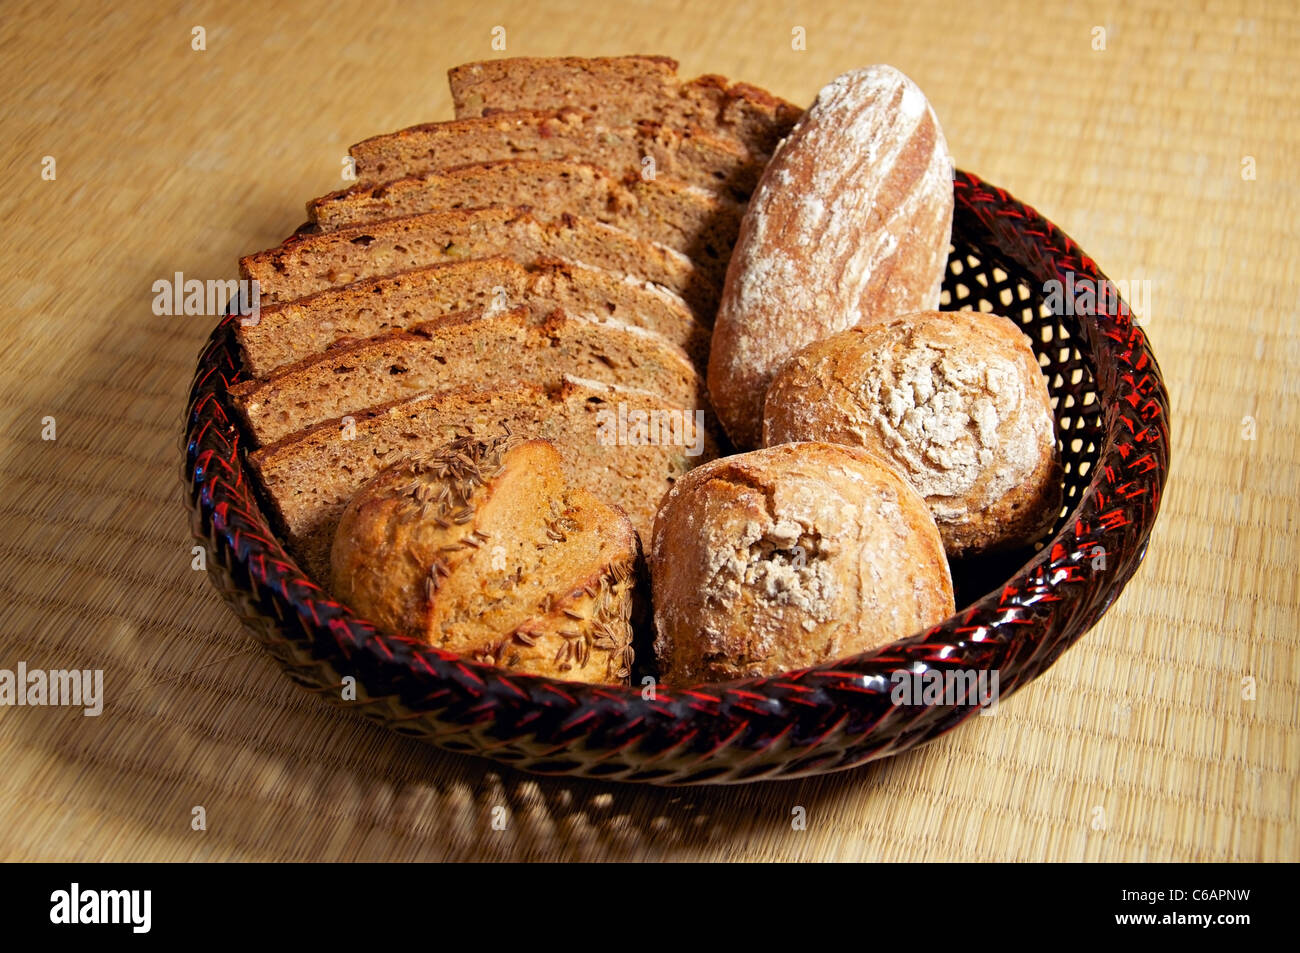 Wholegrain Bread and Buns in a basket Stock Photo